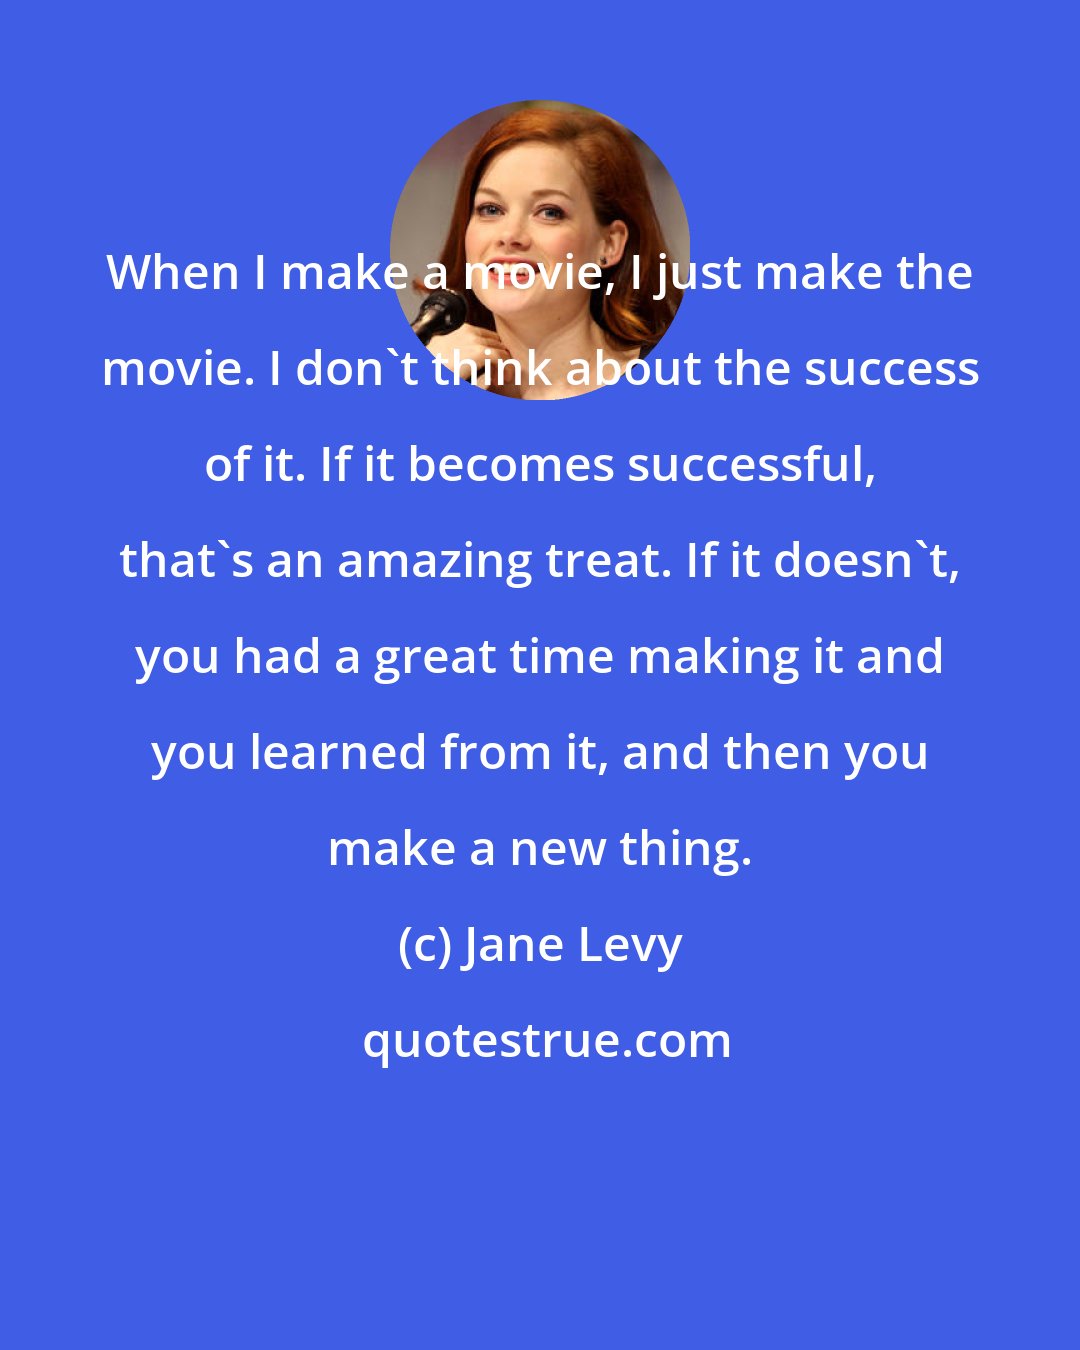 Jane Levy: When I make a movie, I just make the movie. I don't think about the success of it. If it becomes successful, that's an amazing treat. If it doesn't, you had a great time making it and you learned from it, and then you make a new thing.